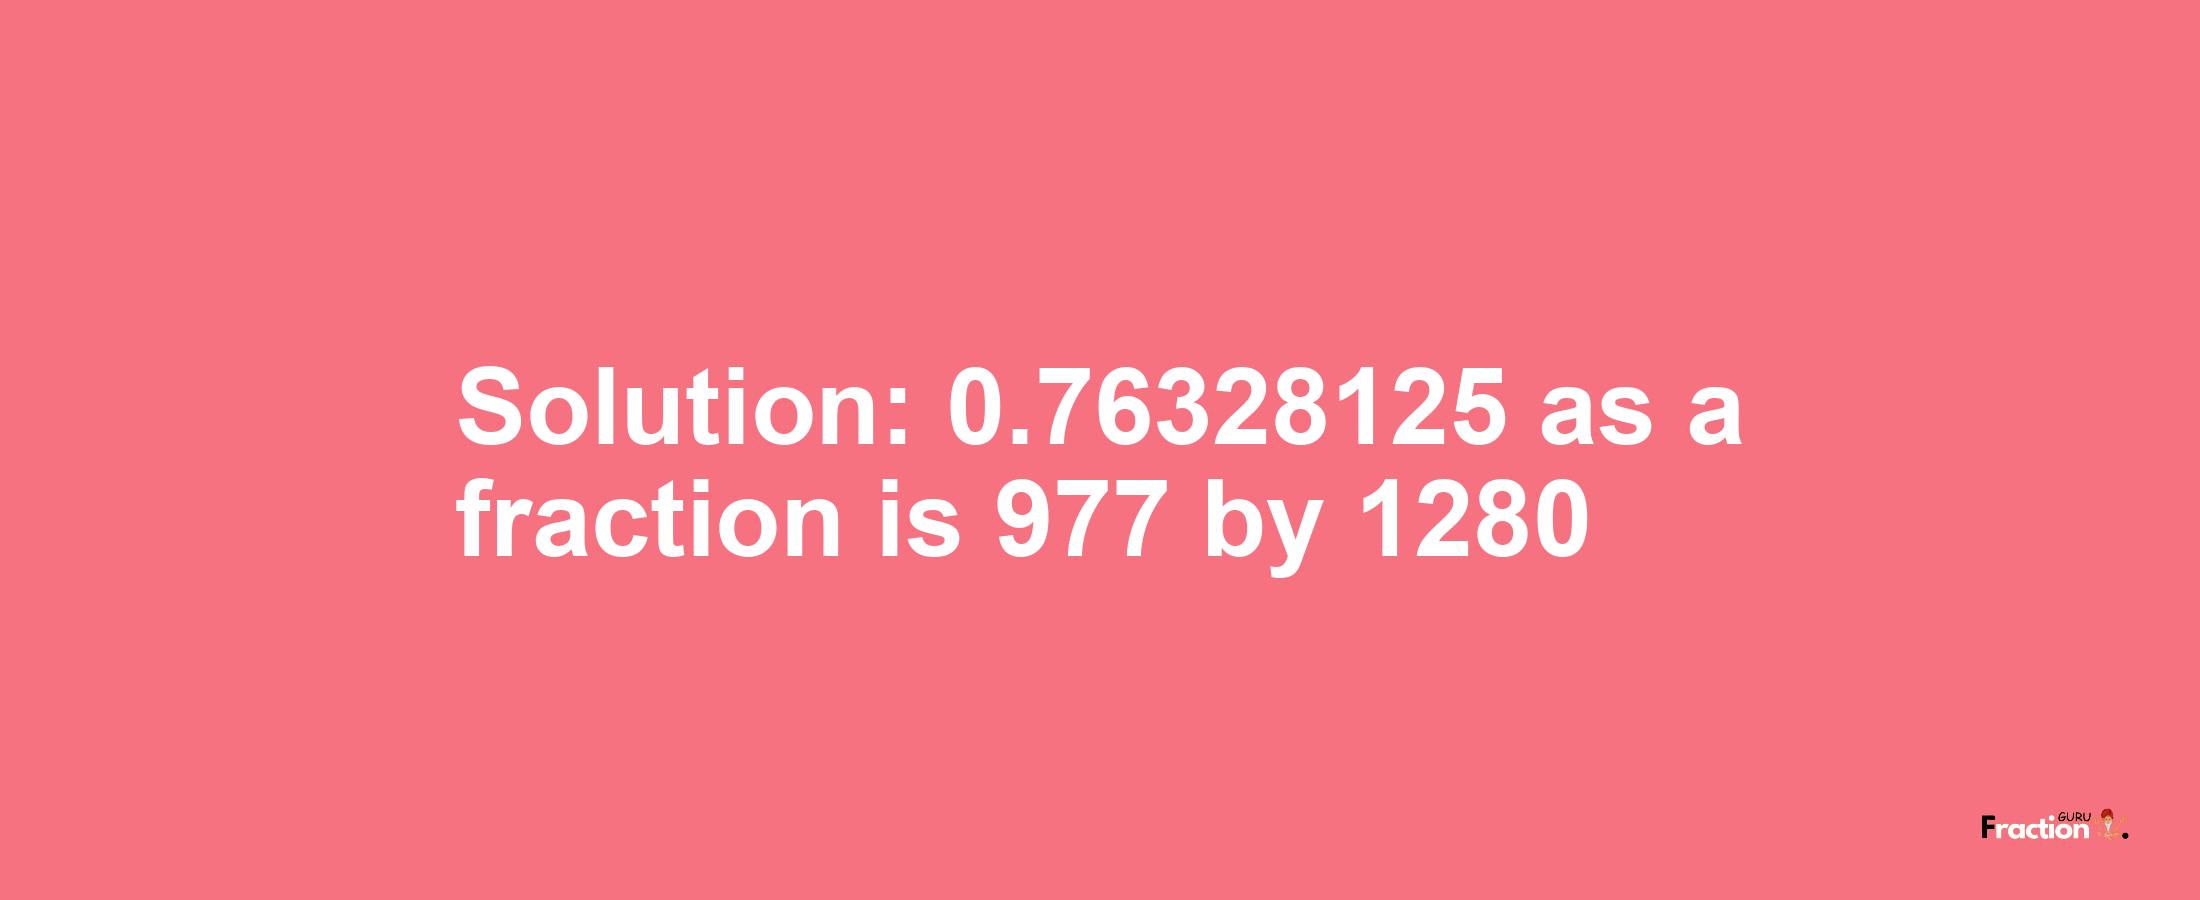 Solution:0.76328125 as a fraction is 977/1280